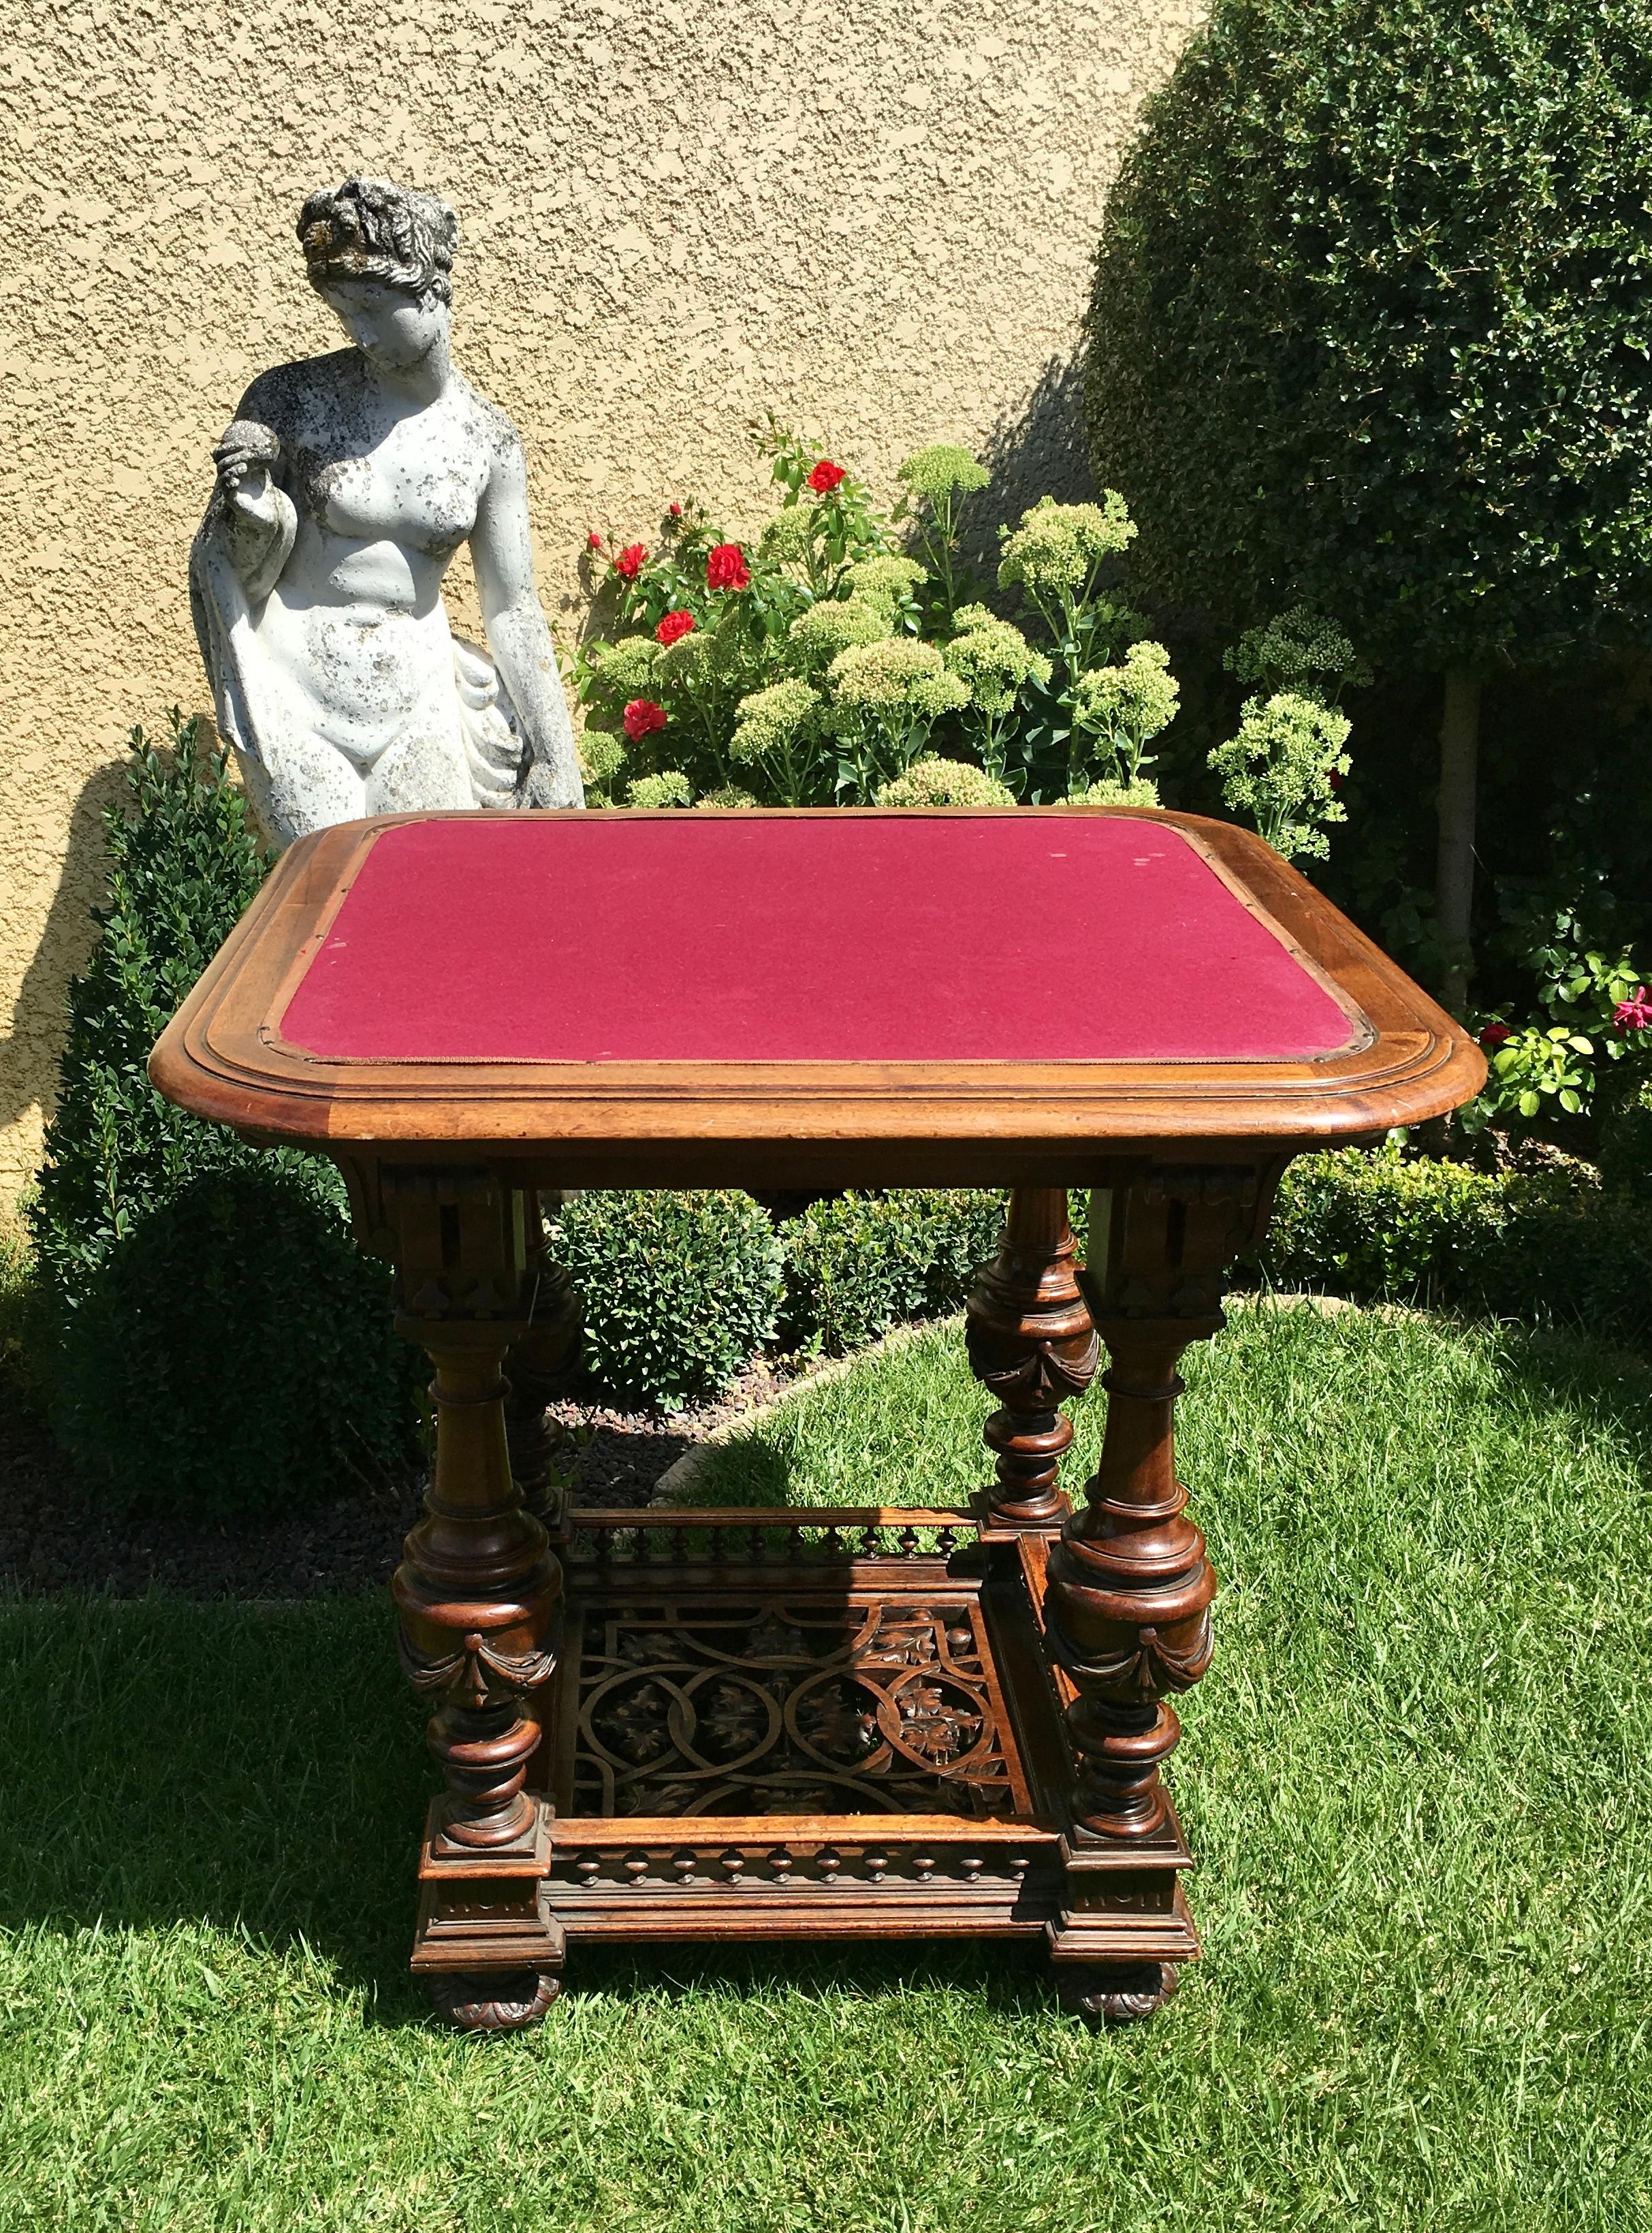 Renaissance style walnut games table. This table has two zippers on either side and rests on 4 baluster-shaped legs connected by a fully sculpted and openwork spacer. French work of very good quality and dating from the 19th century. This table is